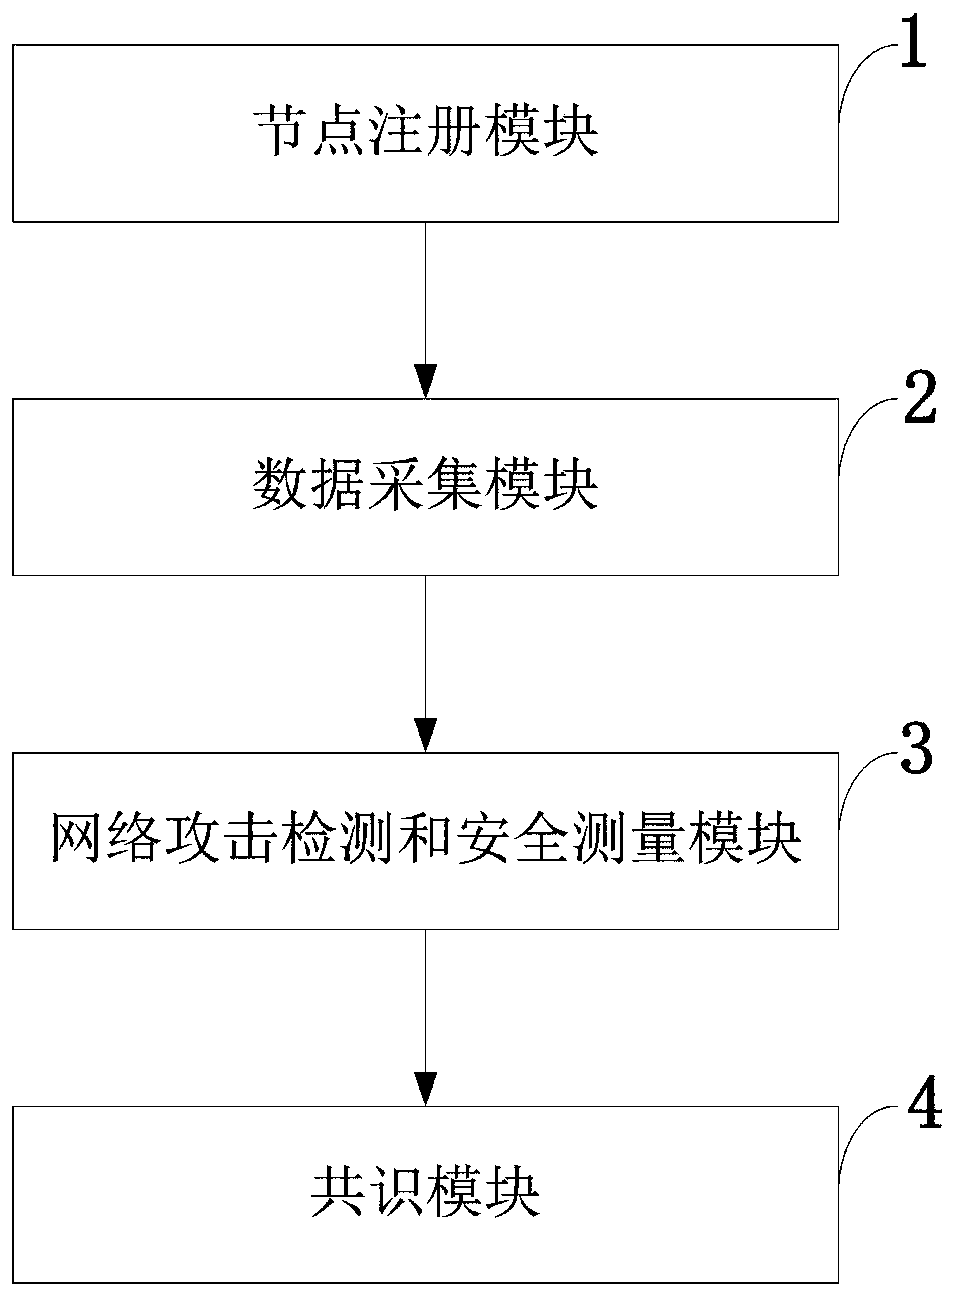 Distributed network attack detection and security measurement system and method based on block chain